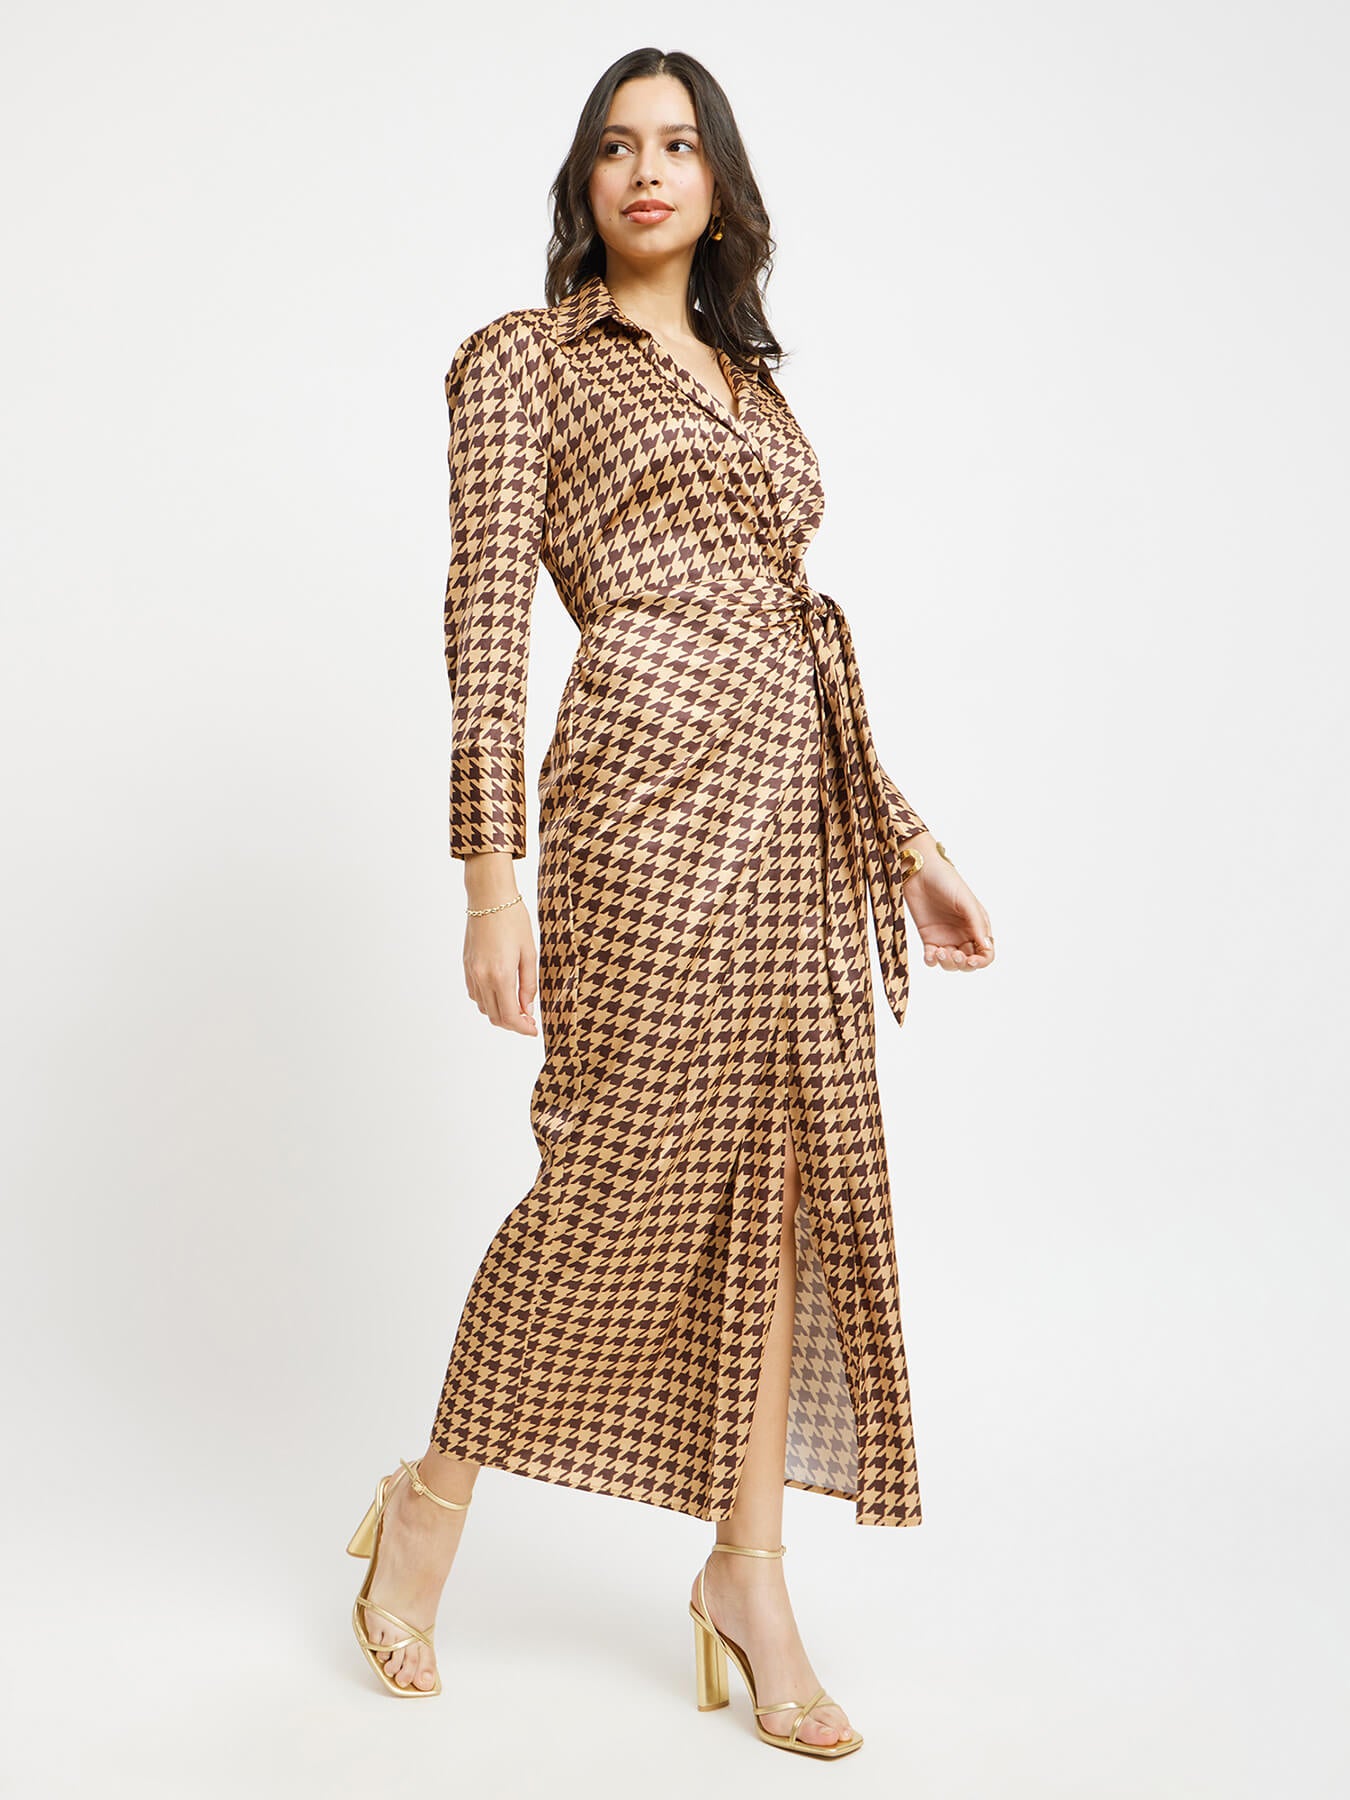 Satin Houndstooth Print Wrap Dress - Brown And Gold